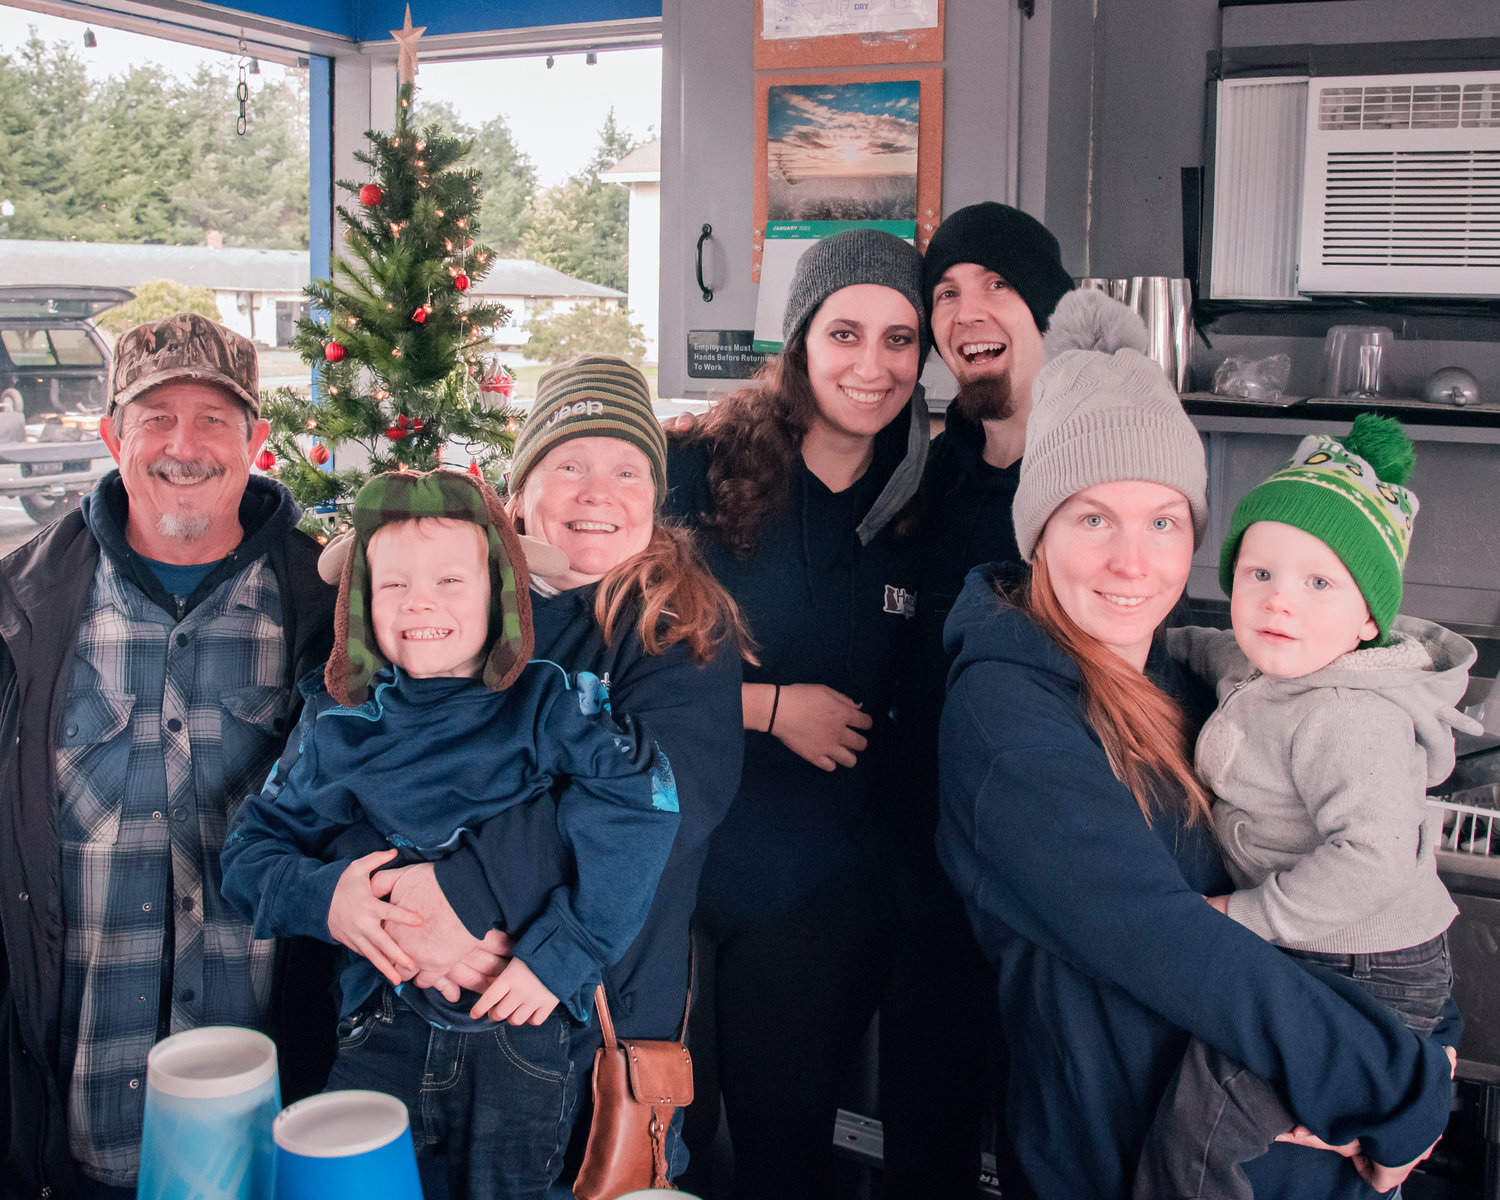 From left, Michael and Lottie Dyer, Brenna Kinsey and Kyle Dyer, with Aryelle Newton and kids, smile and pose for a photo inside Harold’s Burger Bar located at 727 South Gold Street in Centralia.